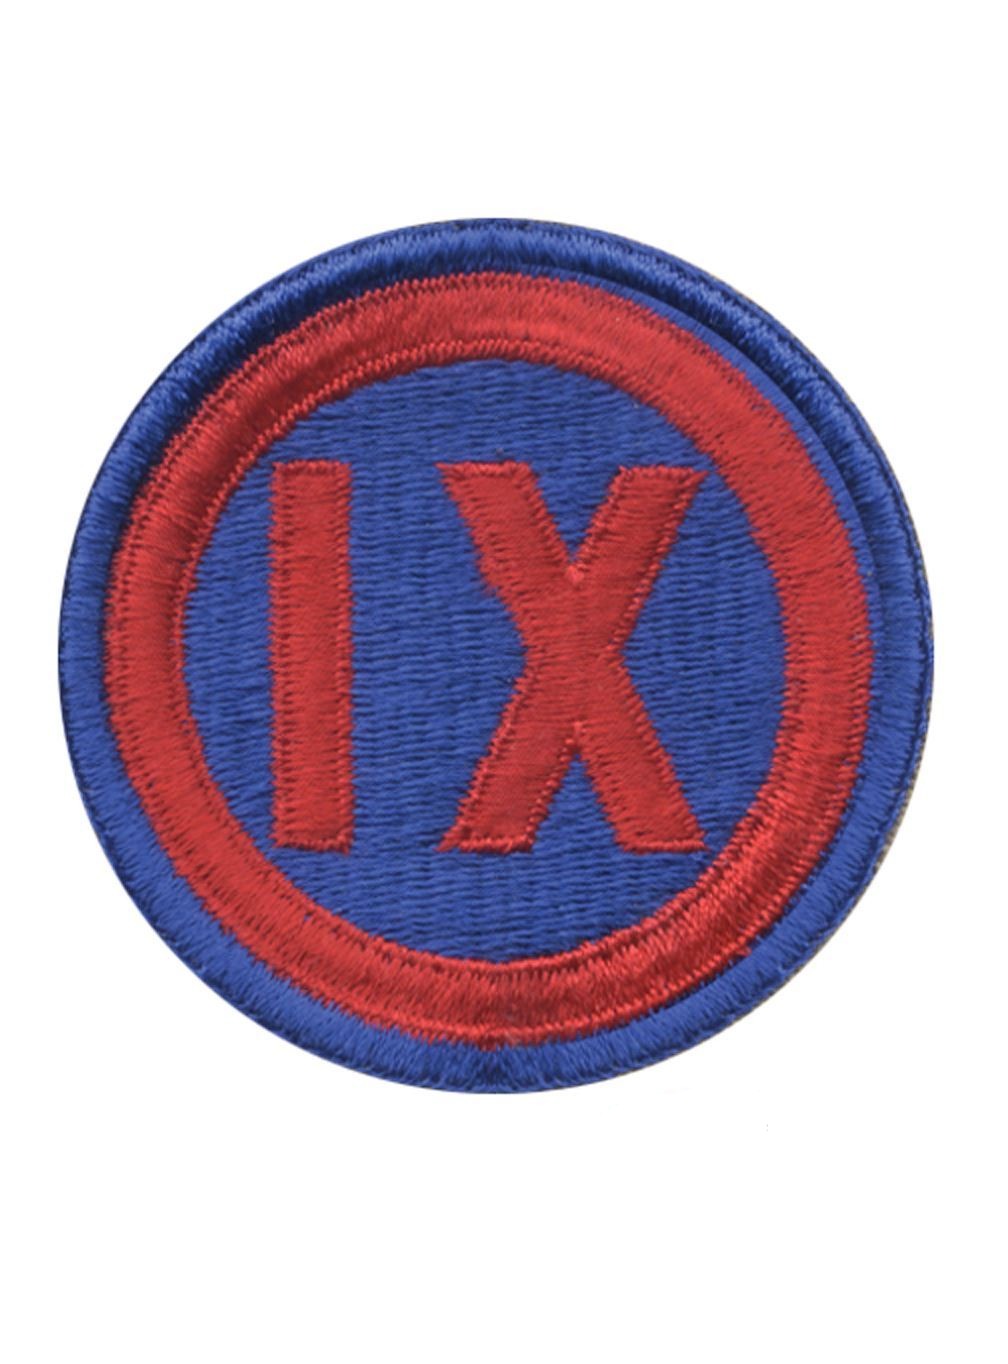 9th Corps Patch (10 per pack)